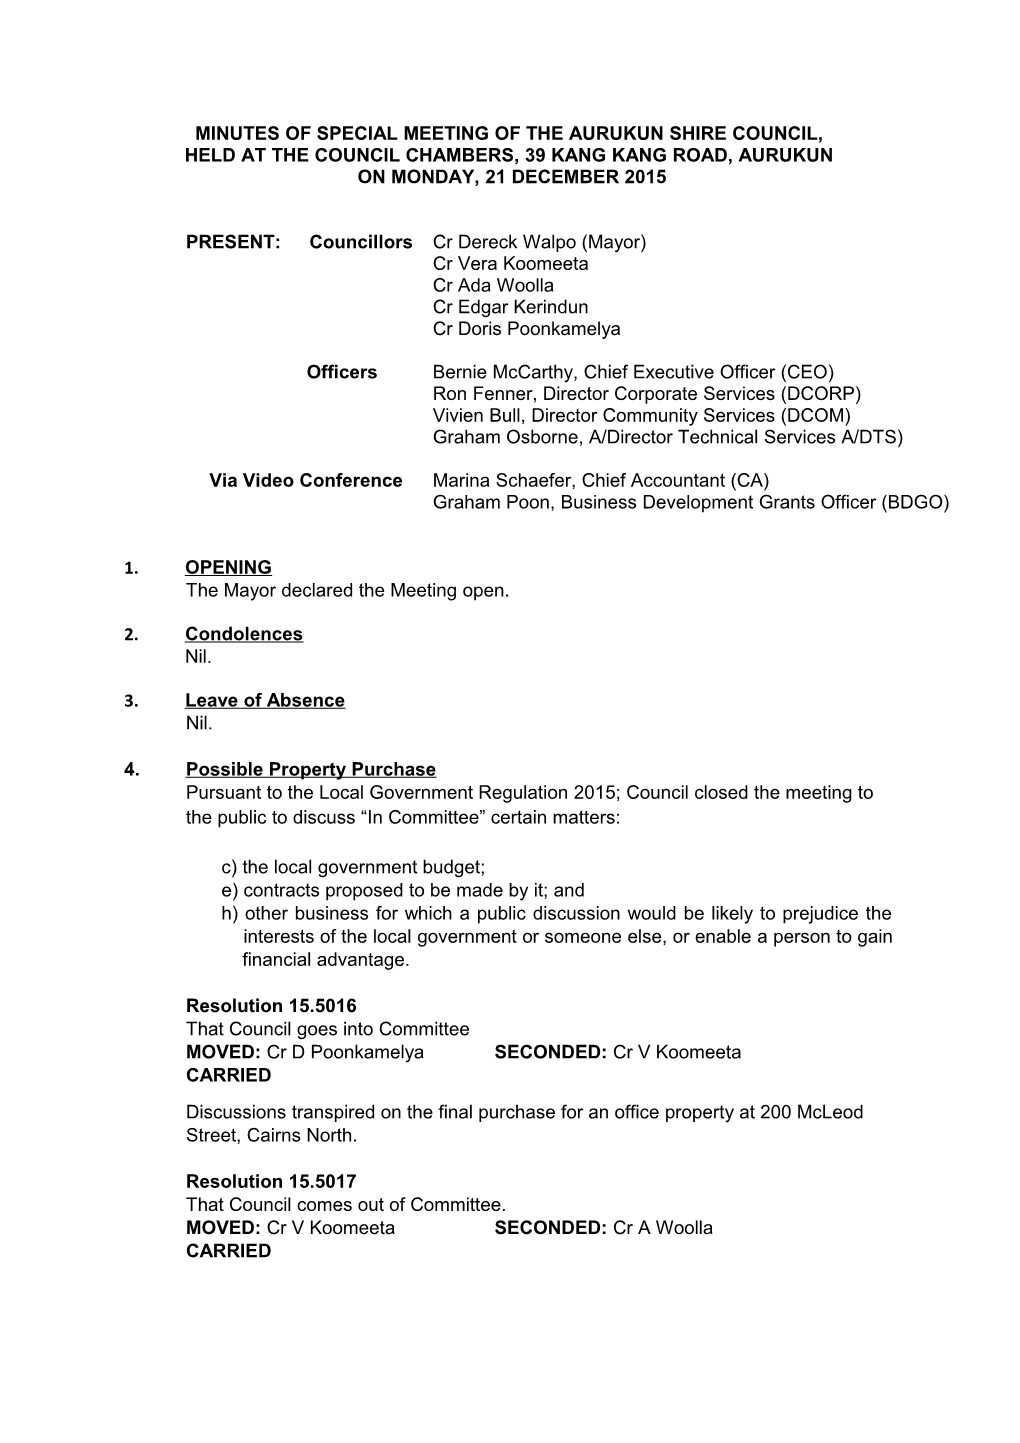 Minutes of Special Meeting of the Aurukun Shire Council